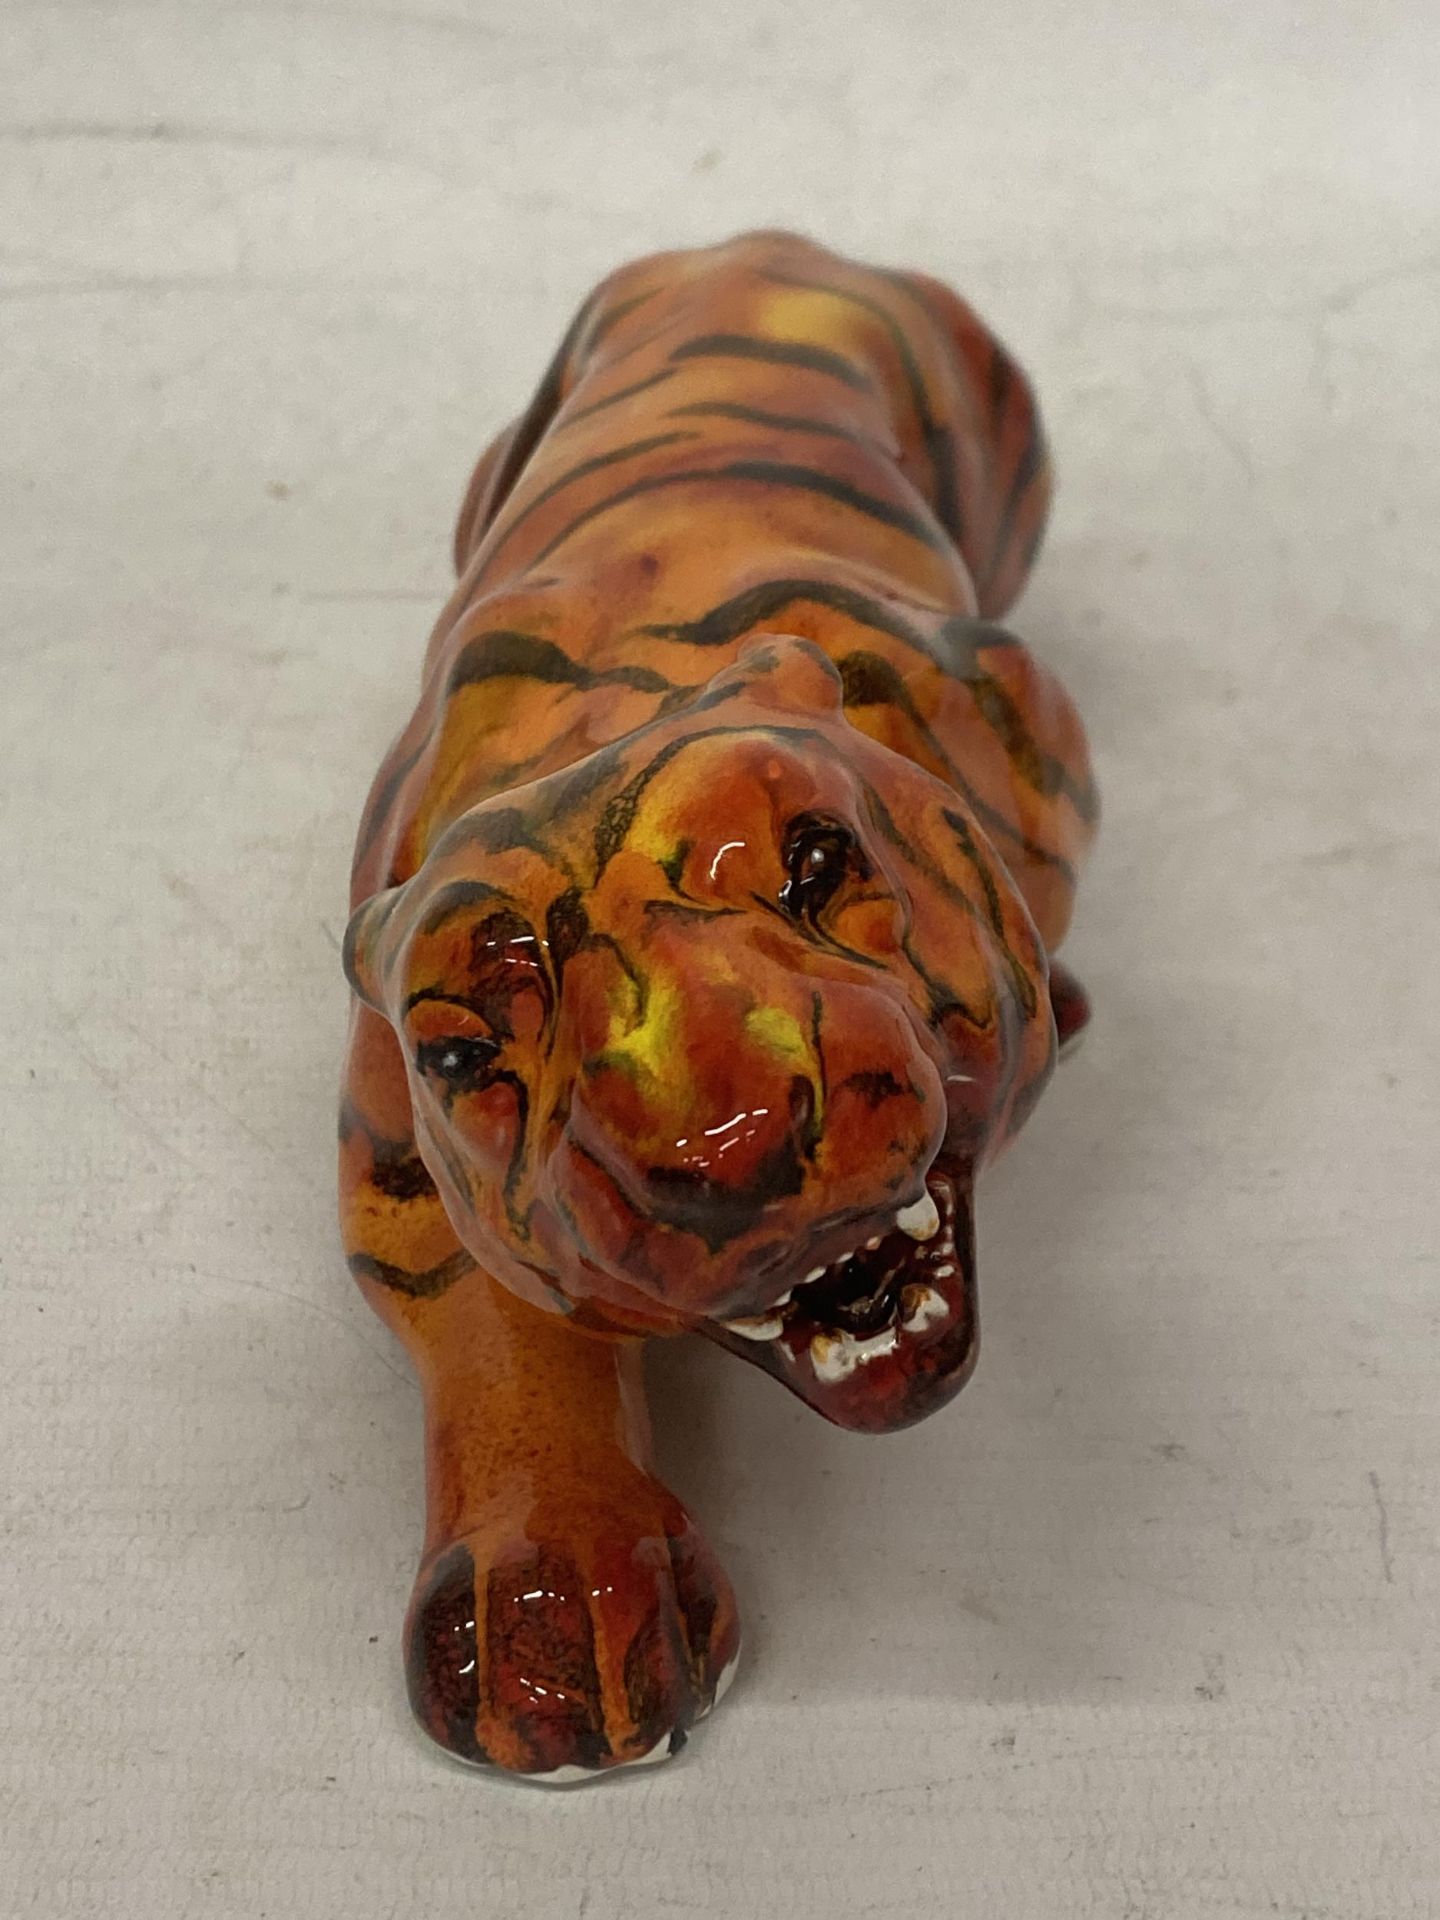 AN ANITA HARRIS TIGER SIGNED IN GOLD - Image 2 of 4